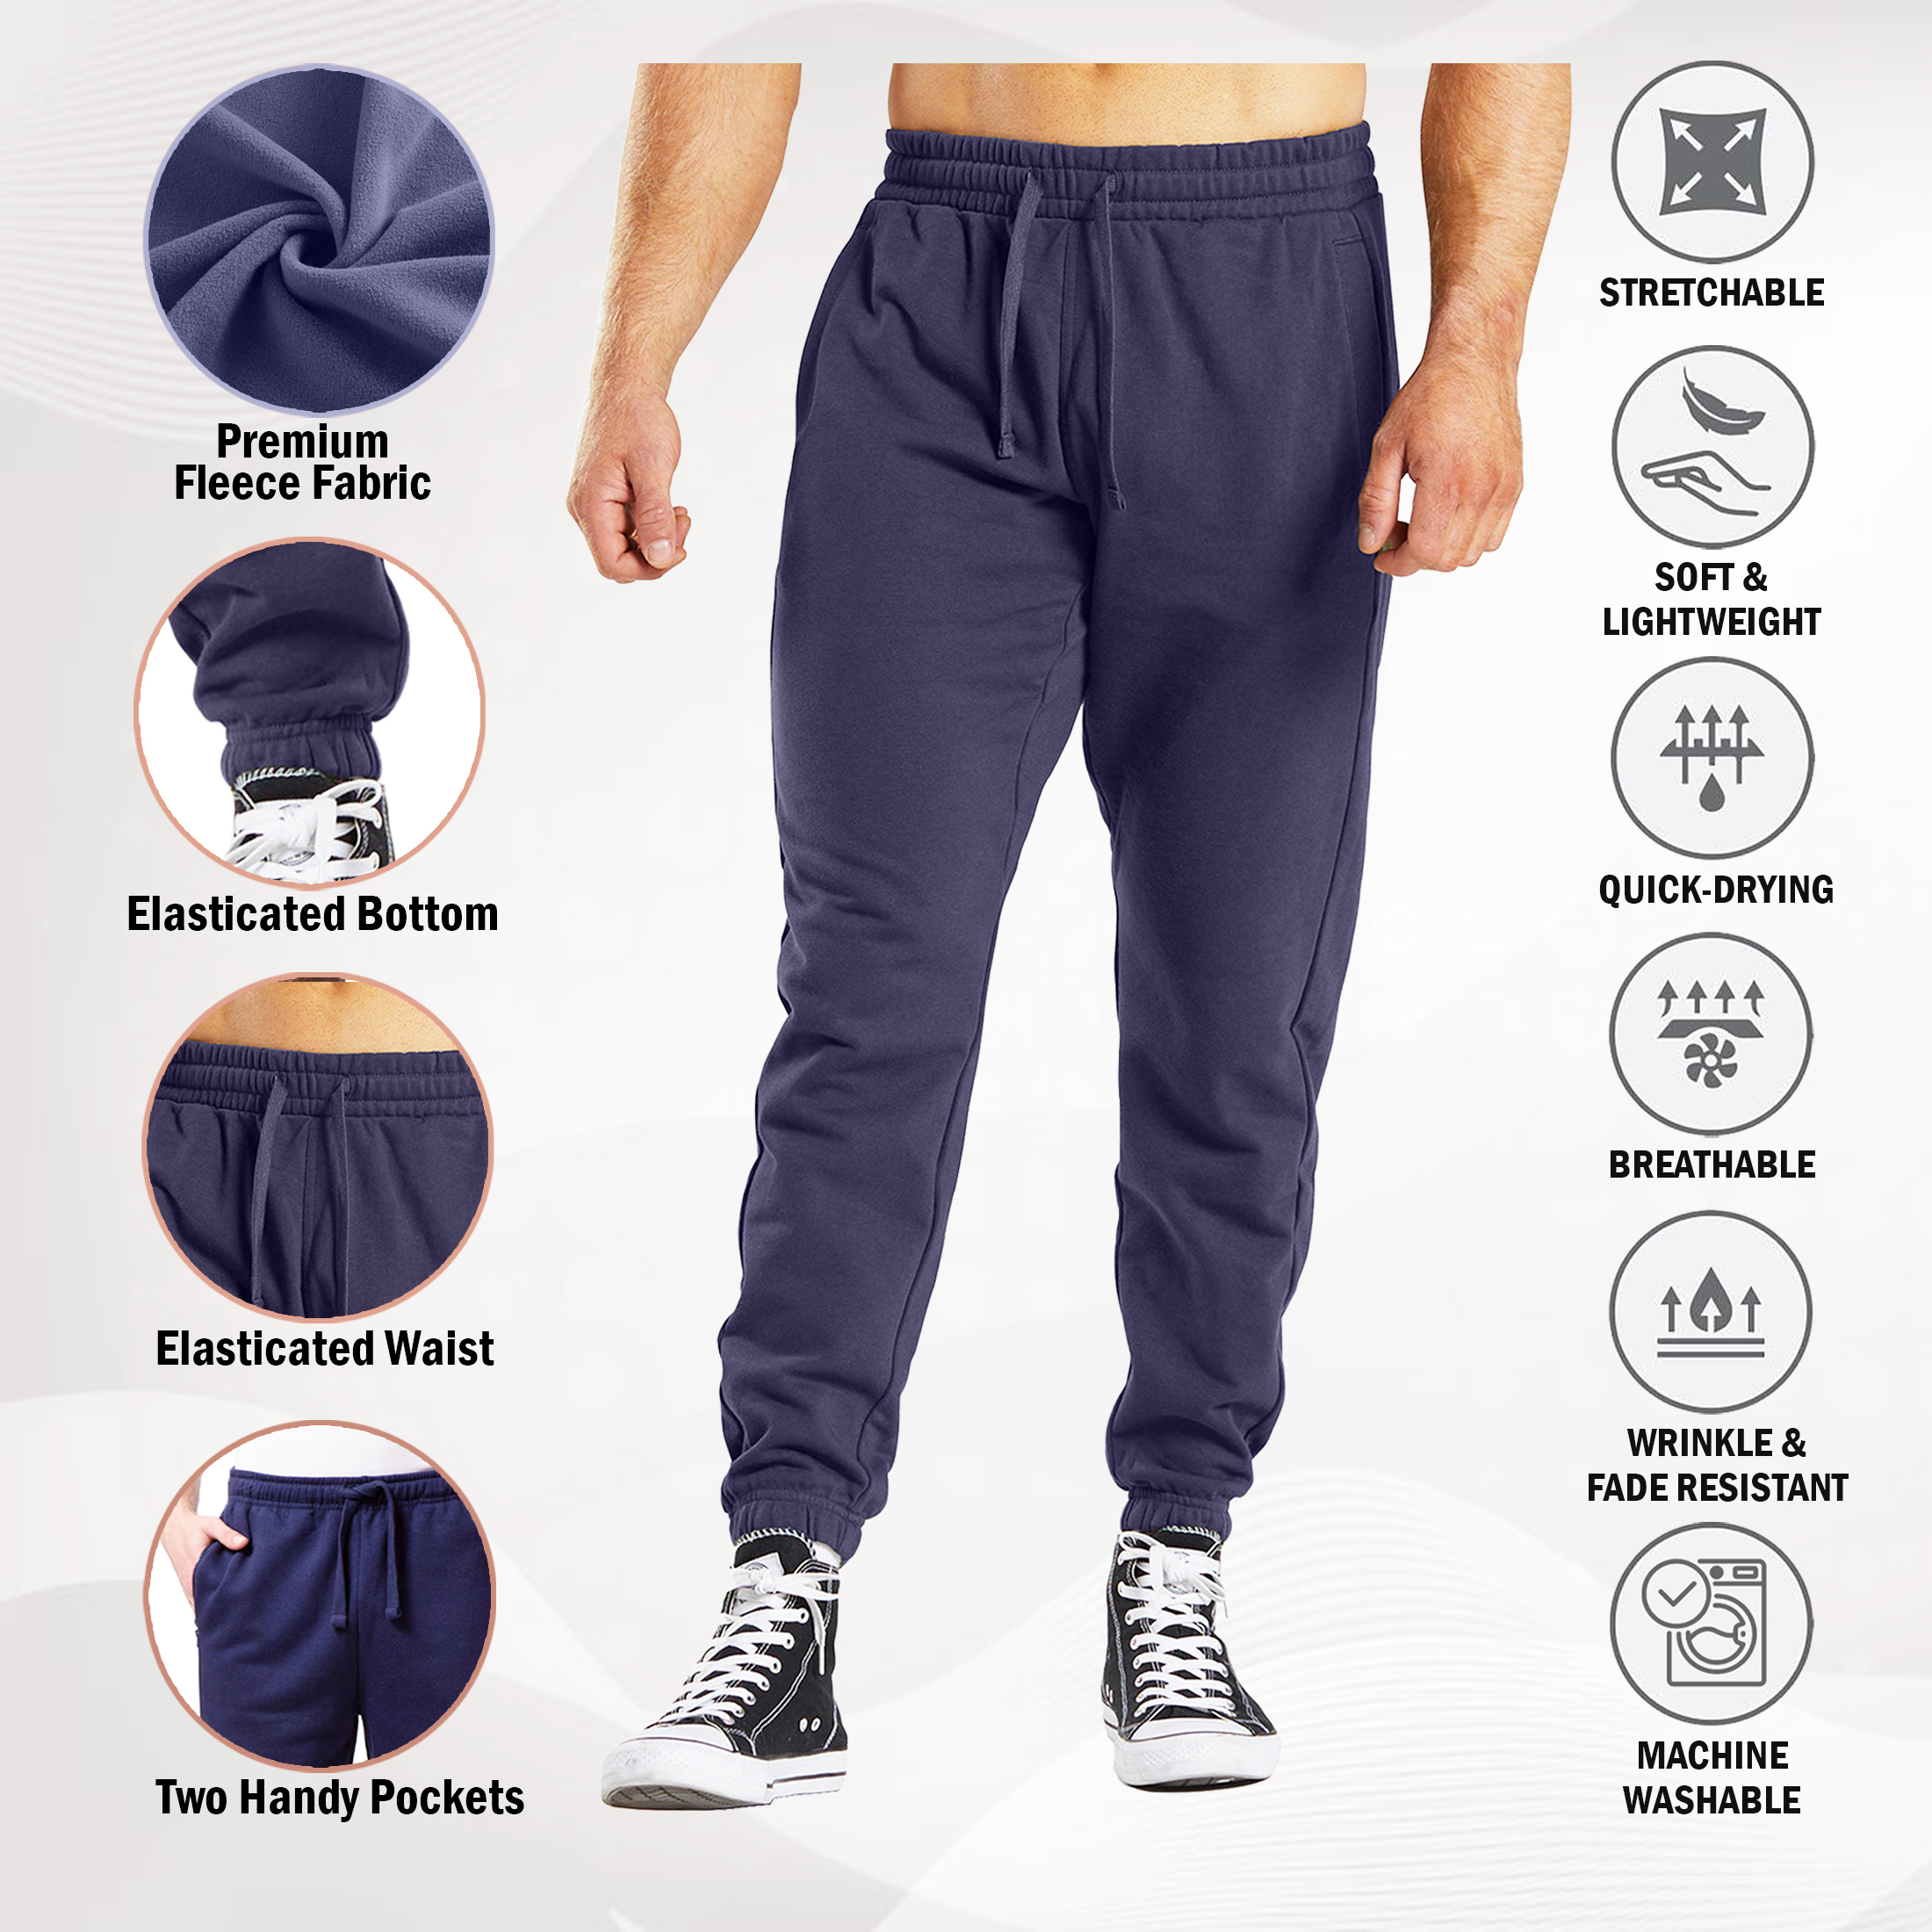 3-Pack: Men's Casual Fleece-Lined Elastic Bottom Jogger Pants With Pockets - X-Large